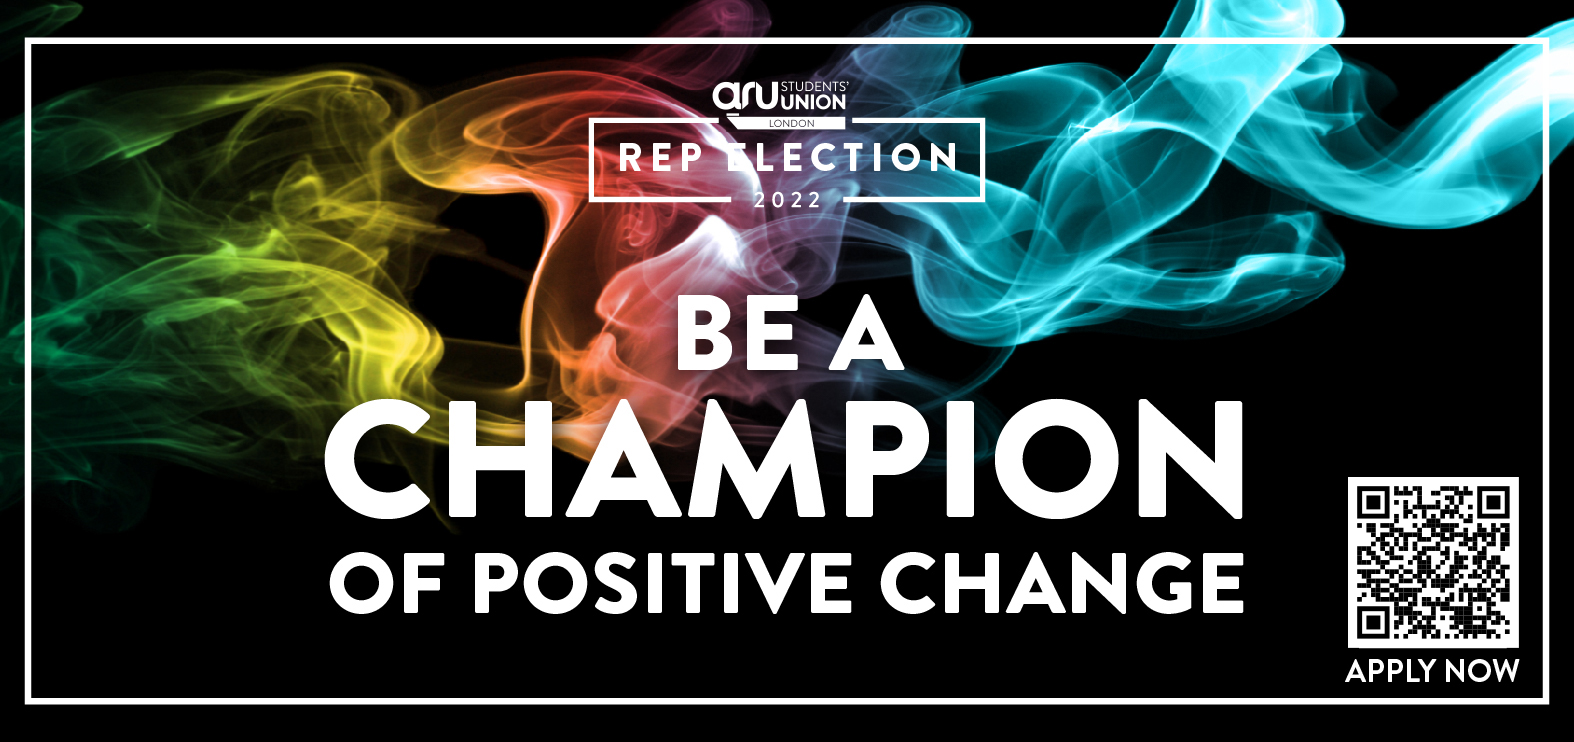 Be a champion of positive change written in white text on a black background with coloured smoke details